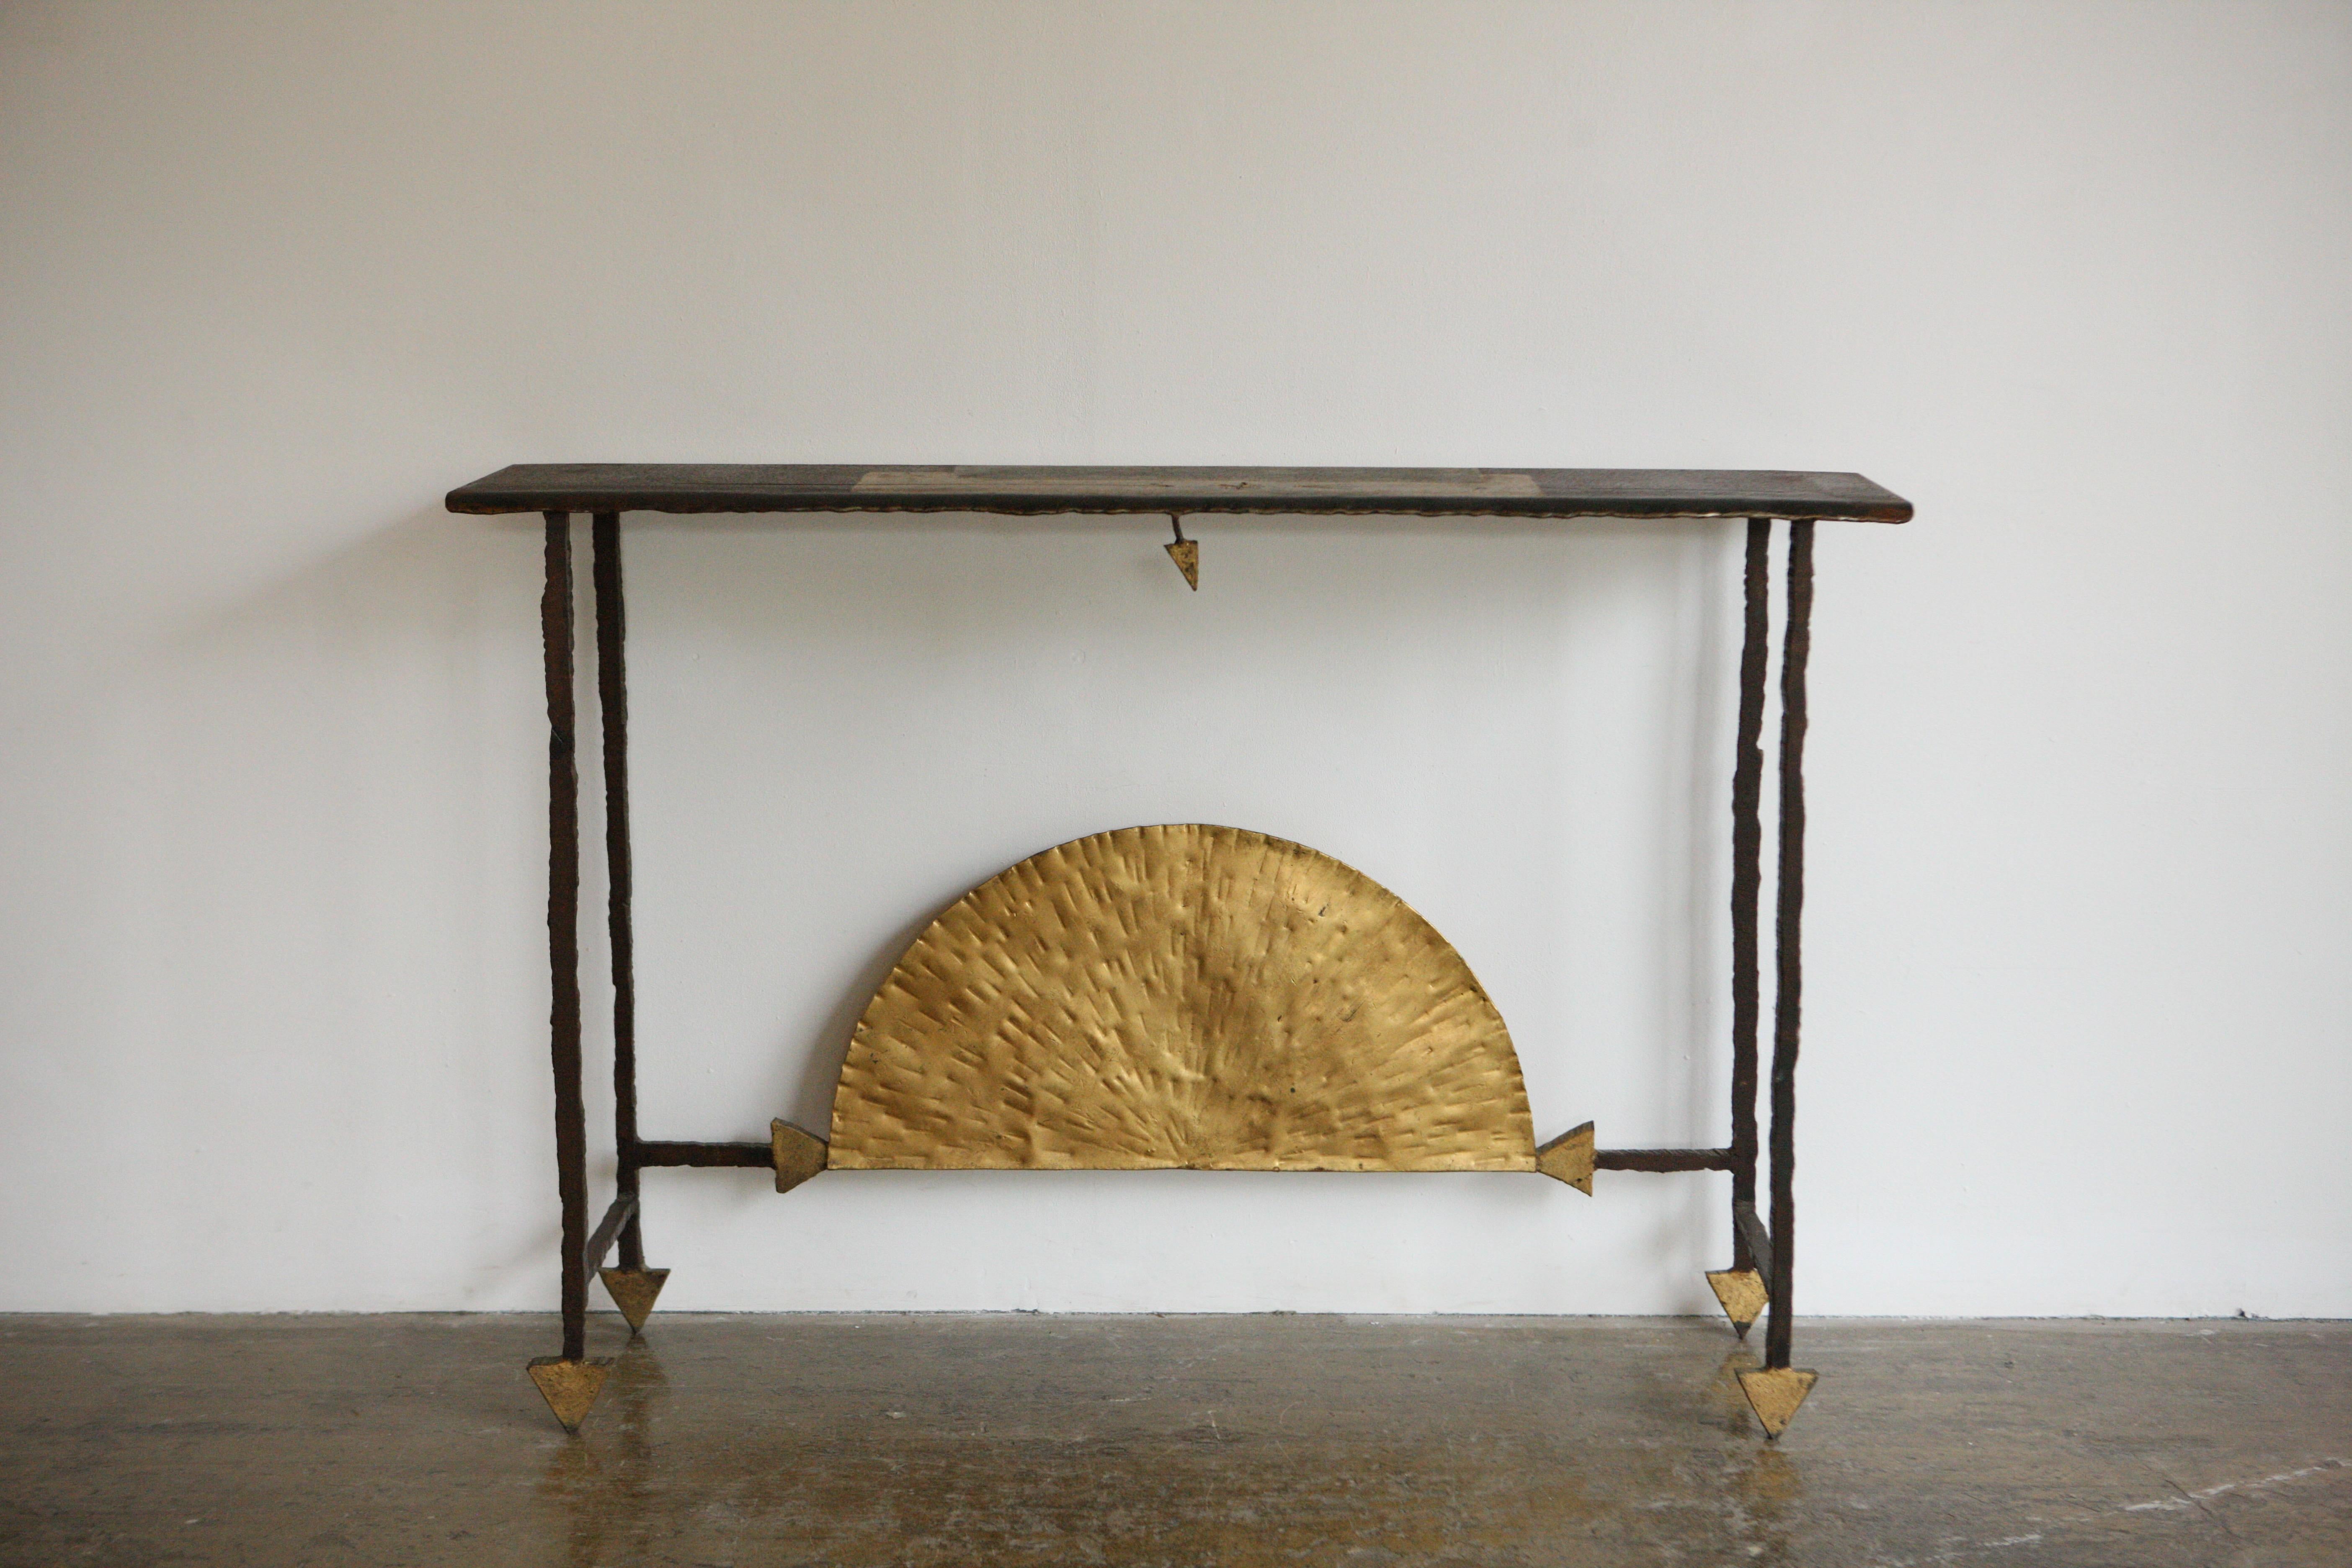 20th Century Wrought Iron Gold Leaf Console by Jean-Jacques Argueyrolles, 1990